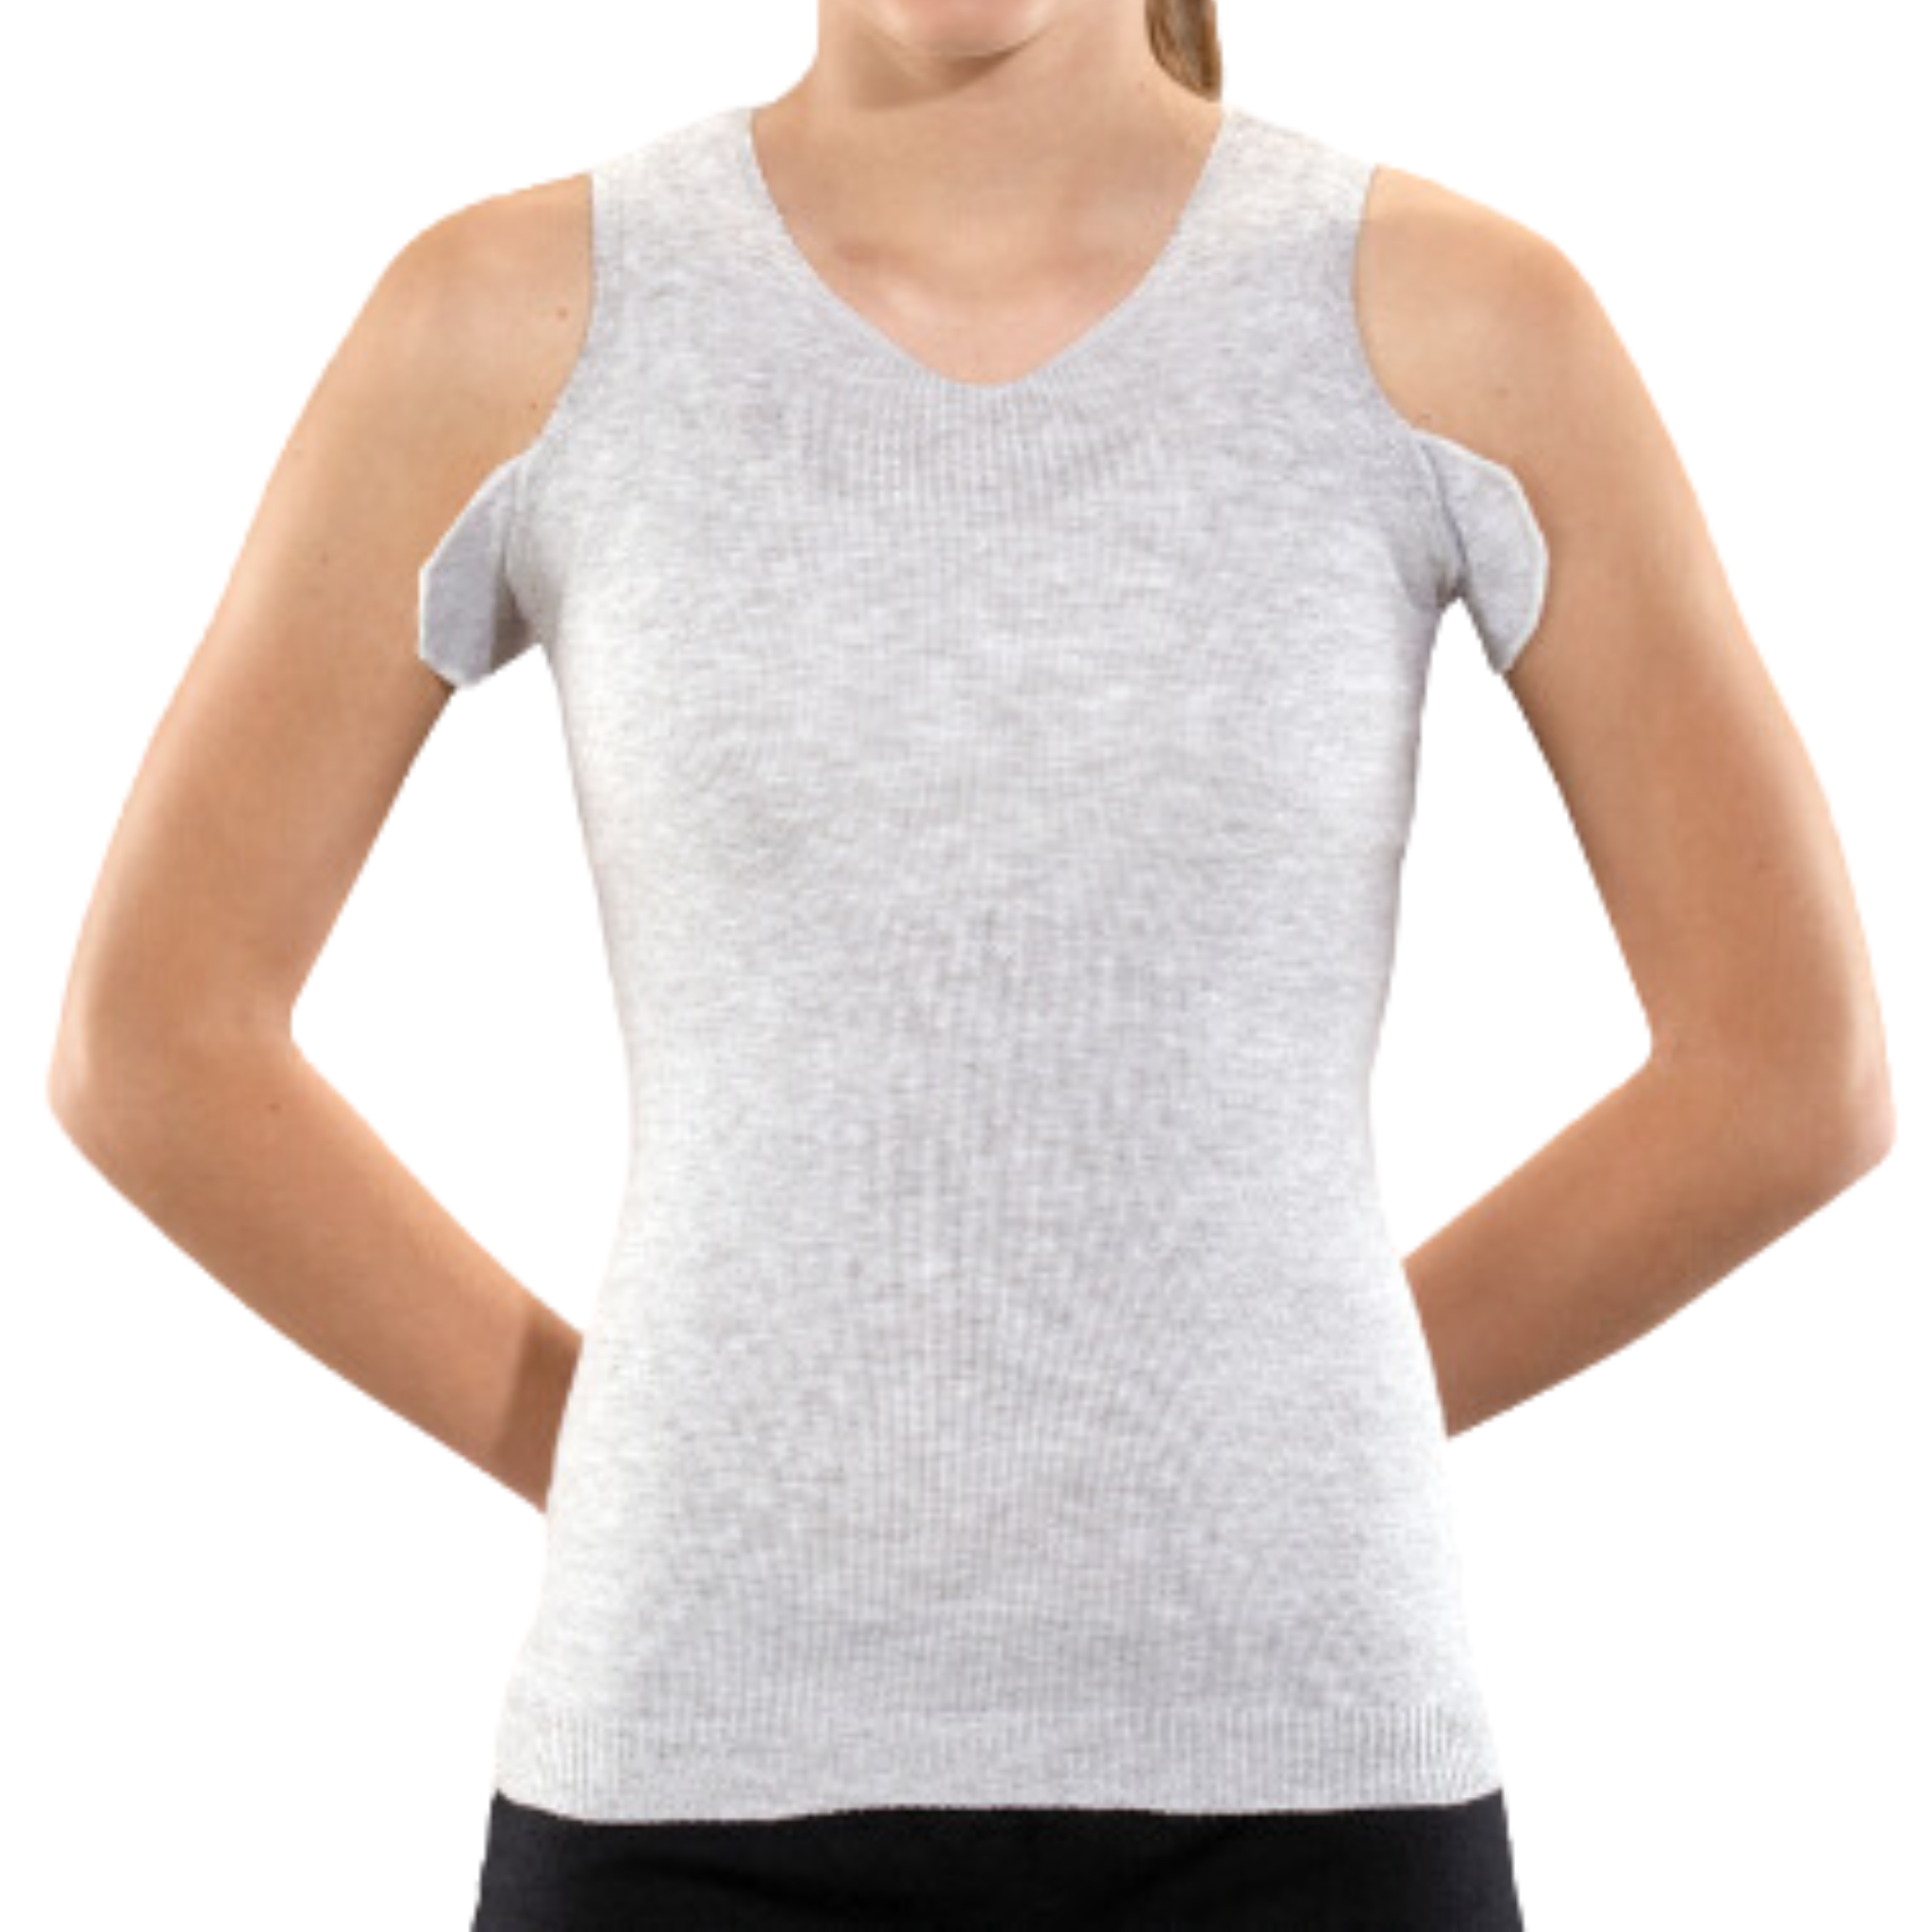 Knit-Rite - Unisex Seamless Vest Torso Interface for Brace- V-Neck with Double Axilla Flaps